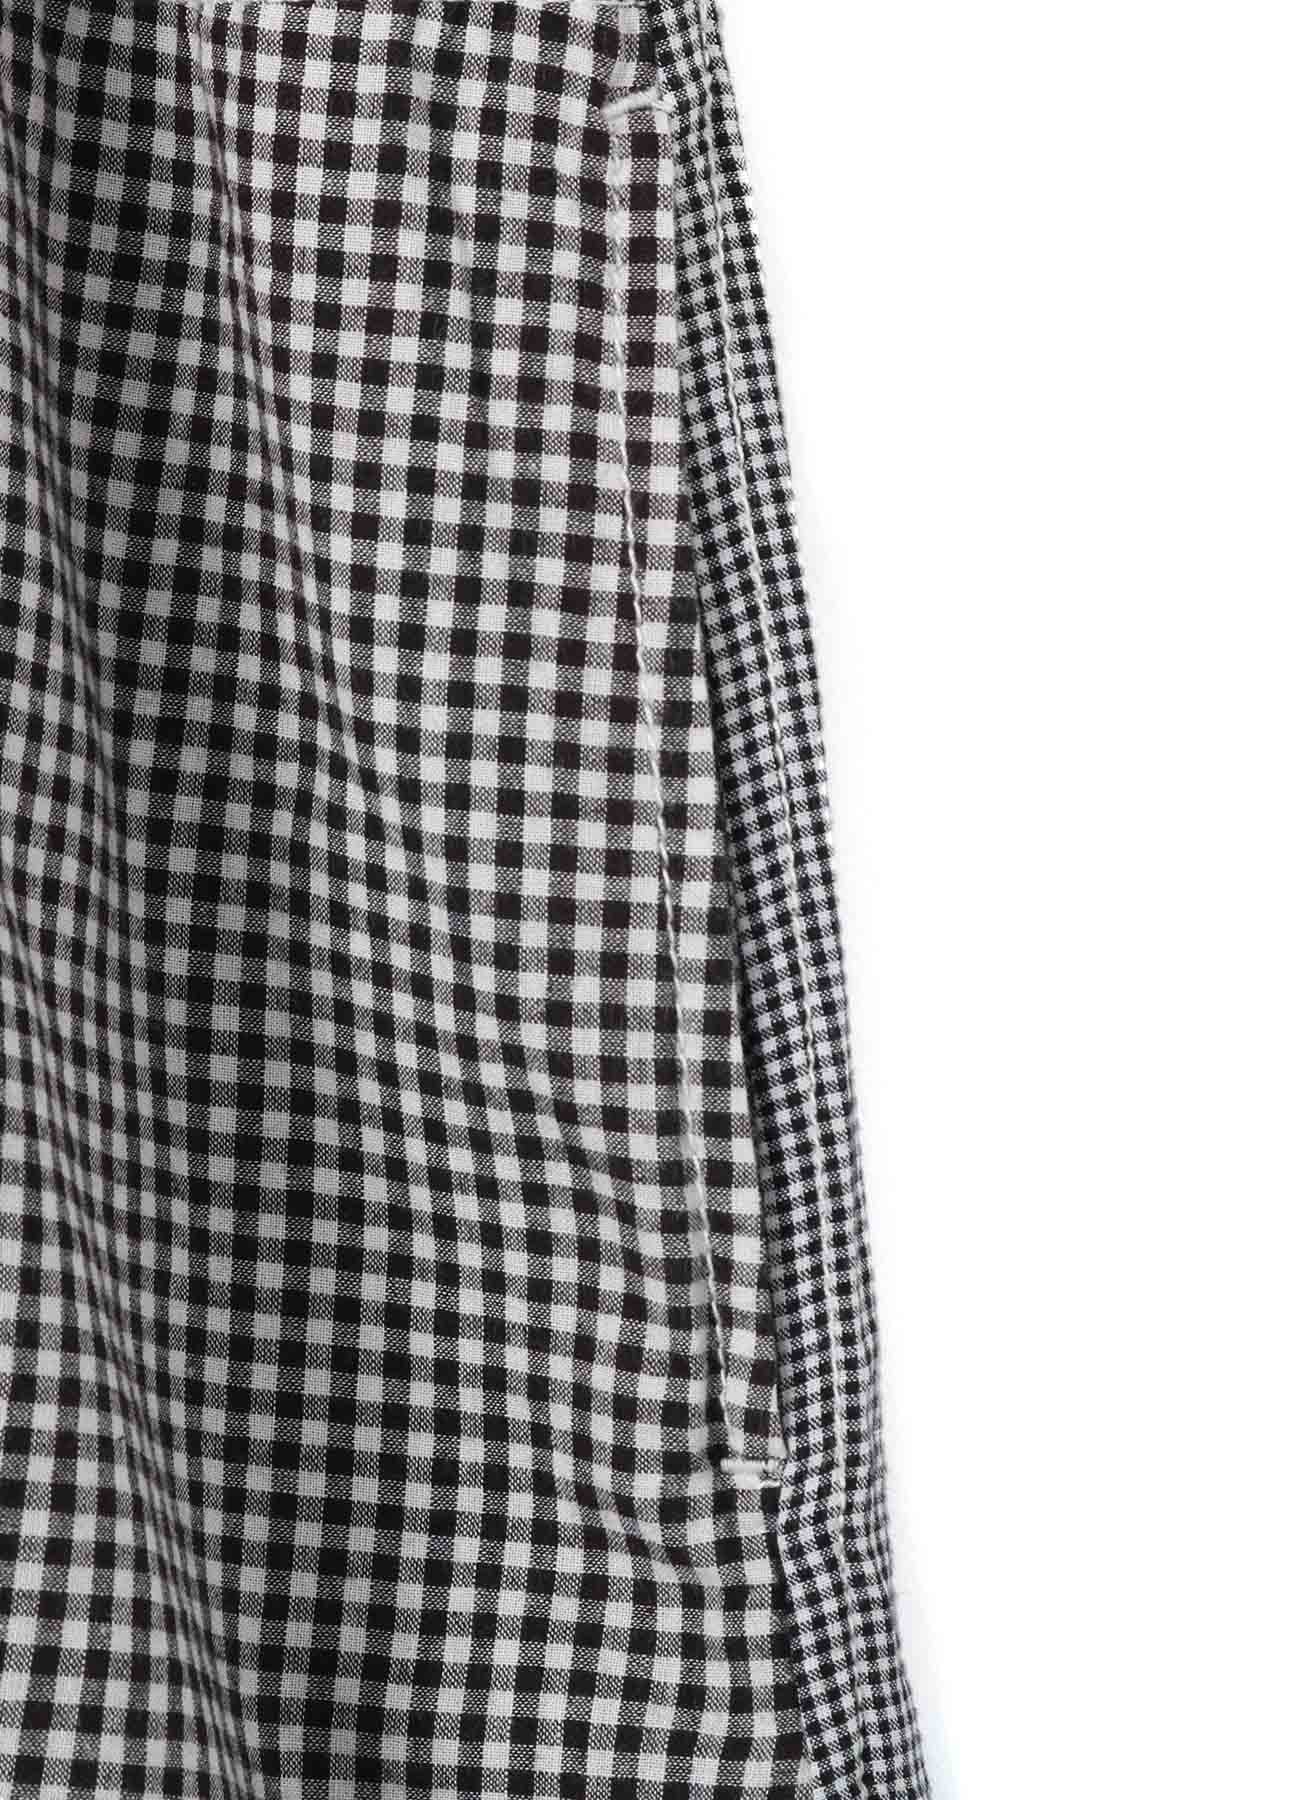 GINGHAM CHECK & COTTON VOILE DRESS